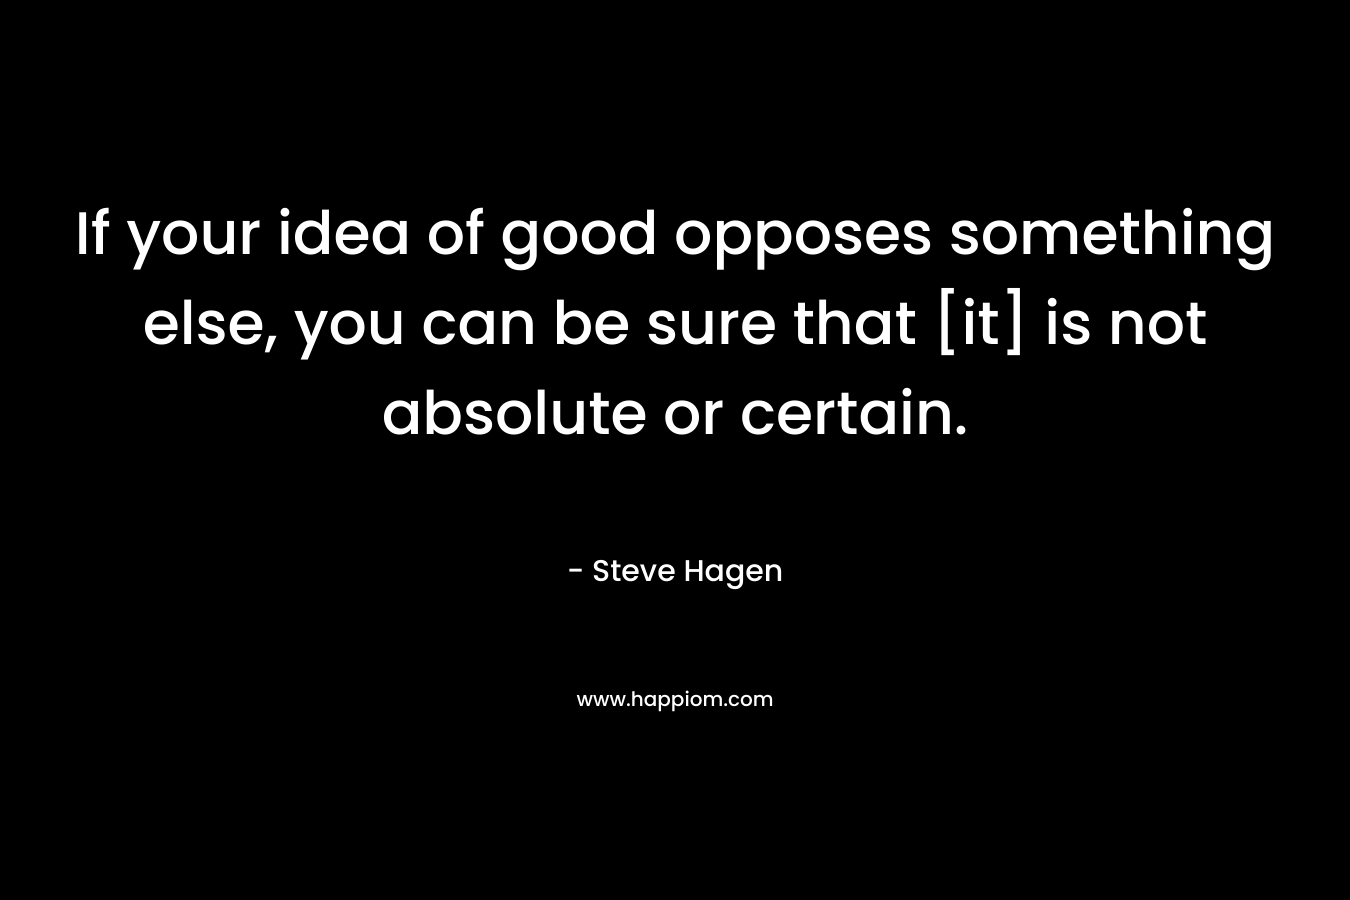 If your idea of good opposes something else, you can be sure that [it] is not absolute or certain.